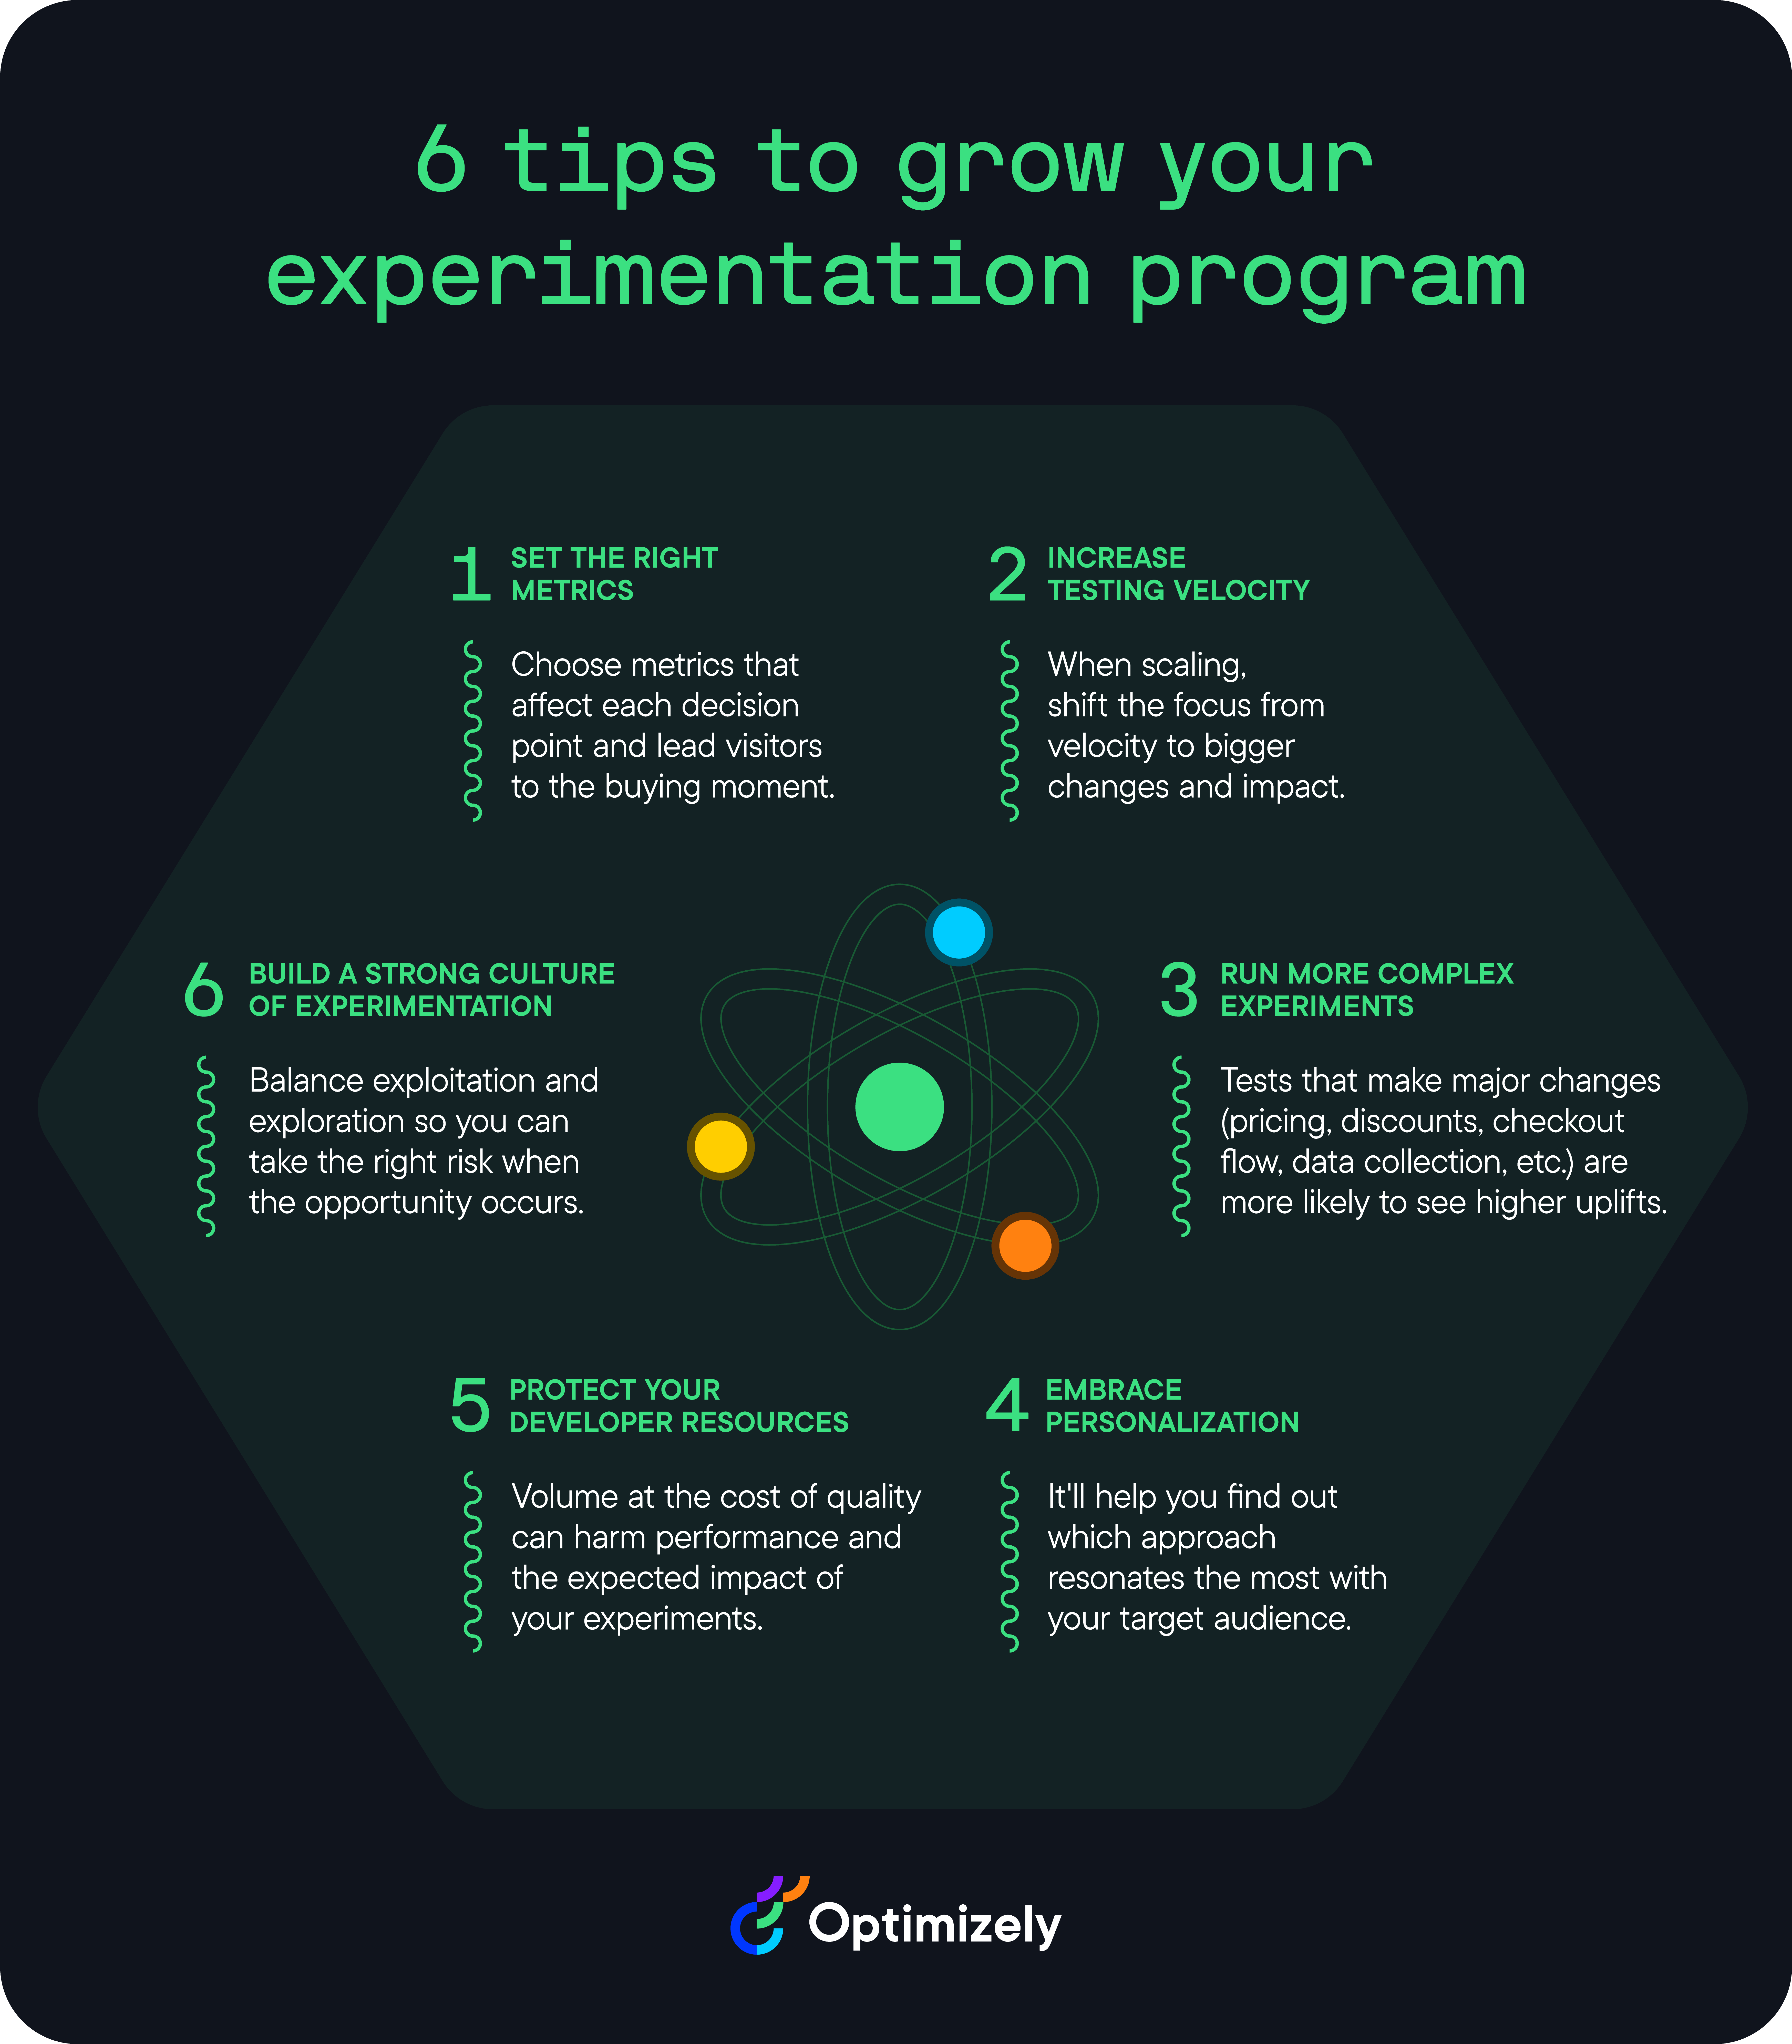 Recommendations to scale your experimentation program